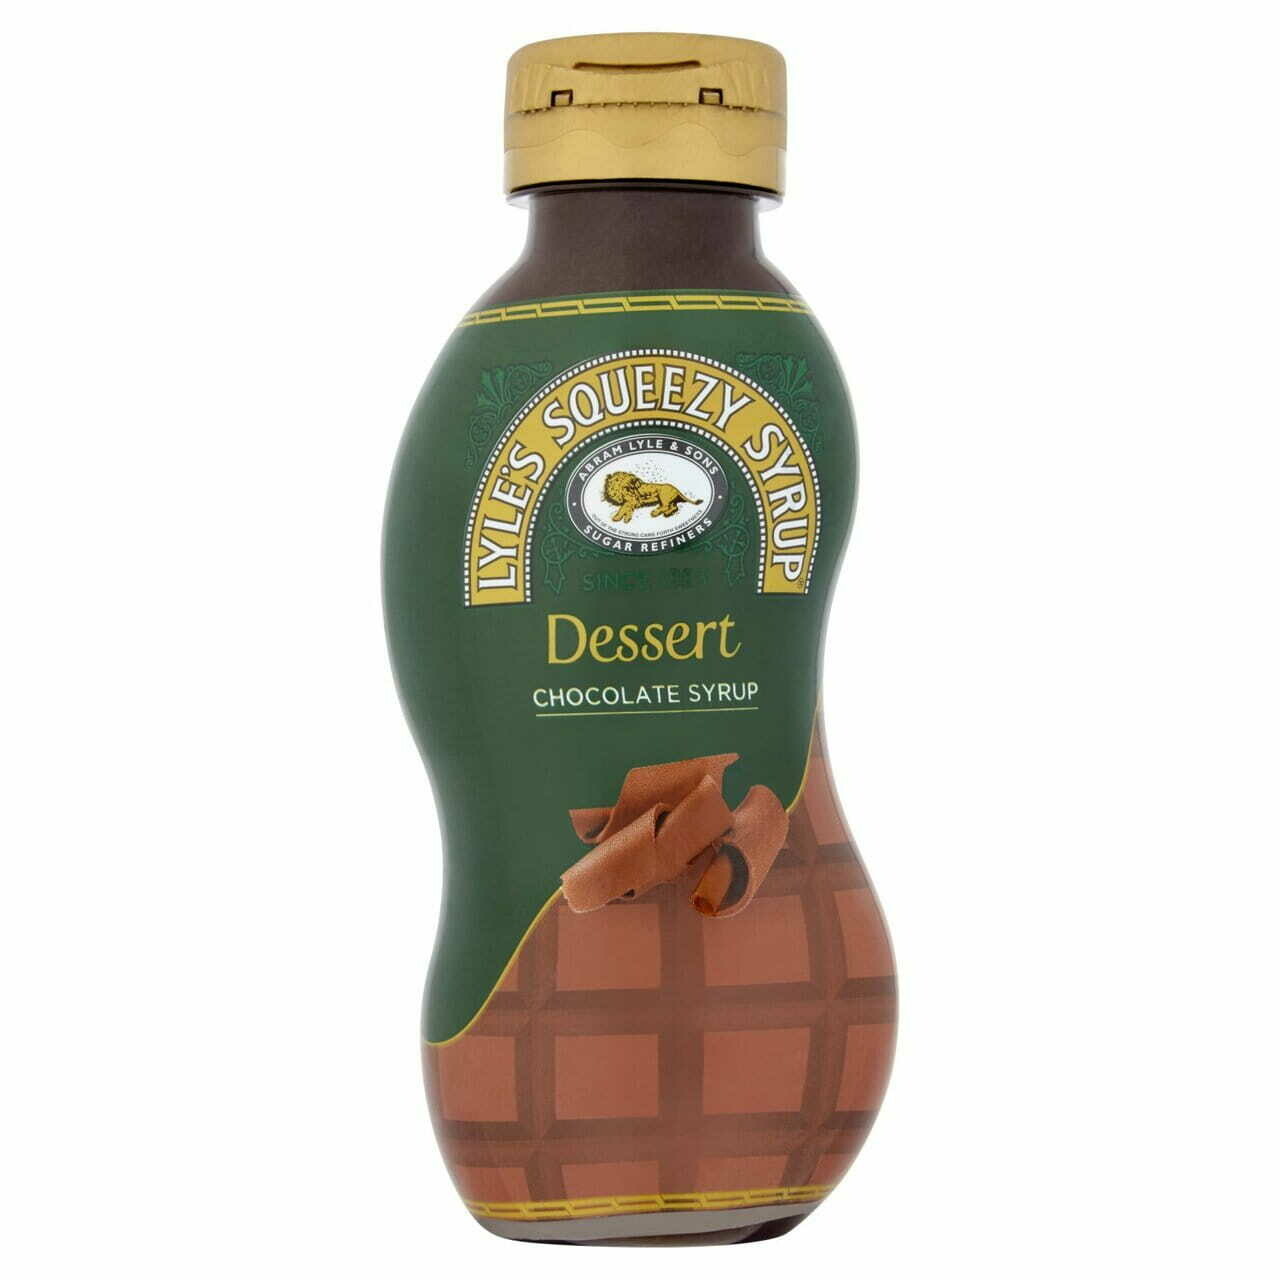 Lyles Squeezy Syrup Dessert Chocolate Syrup 325g